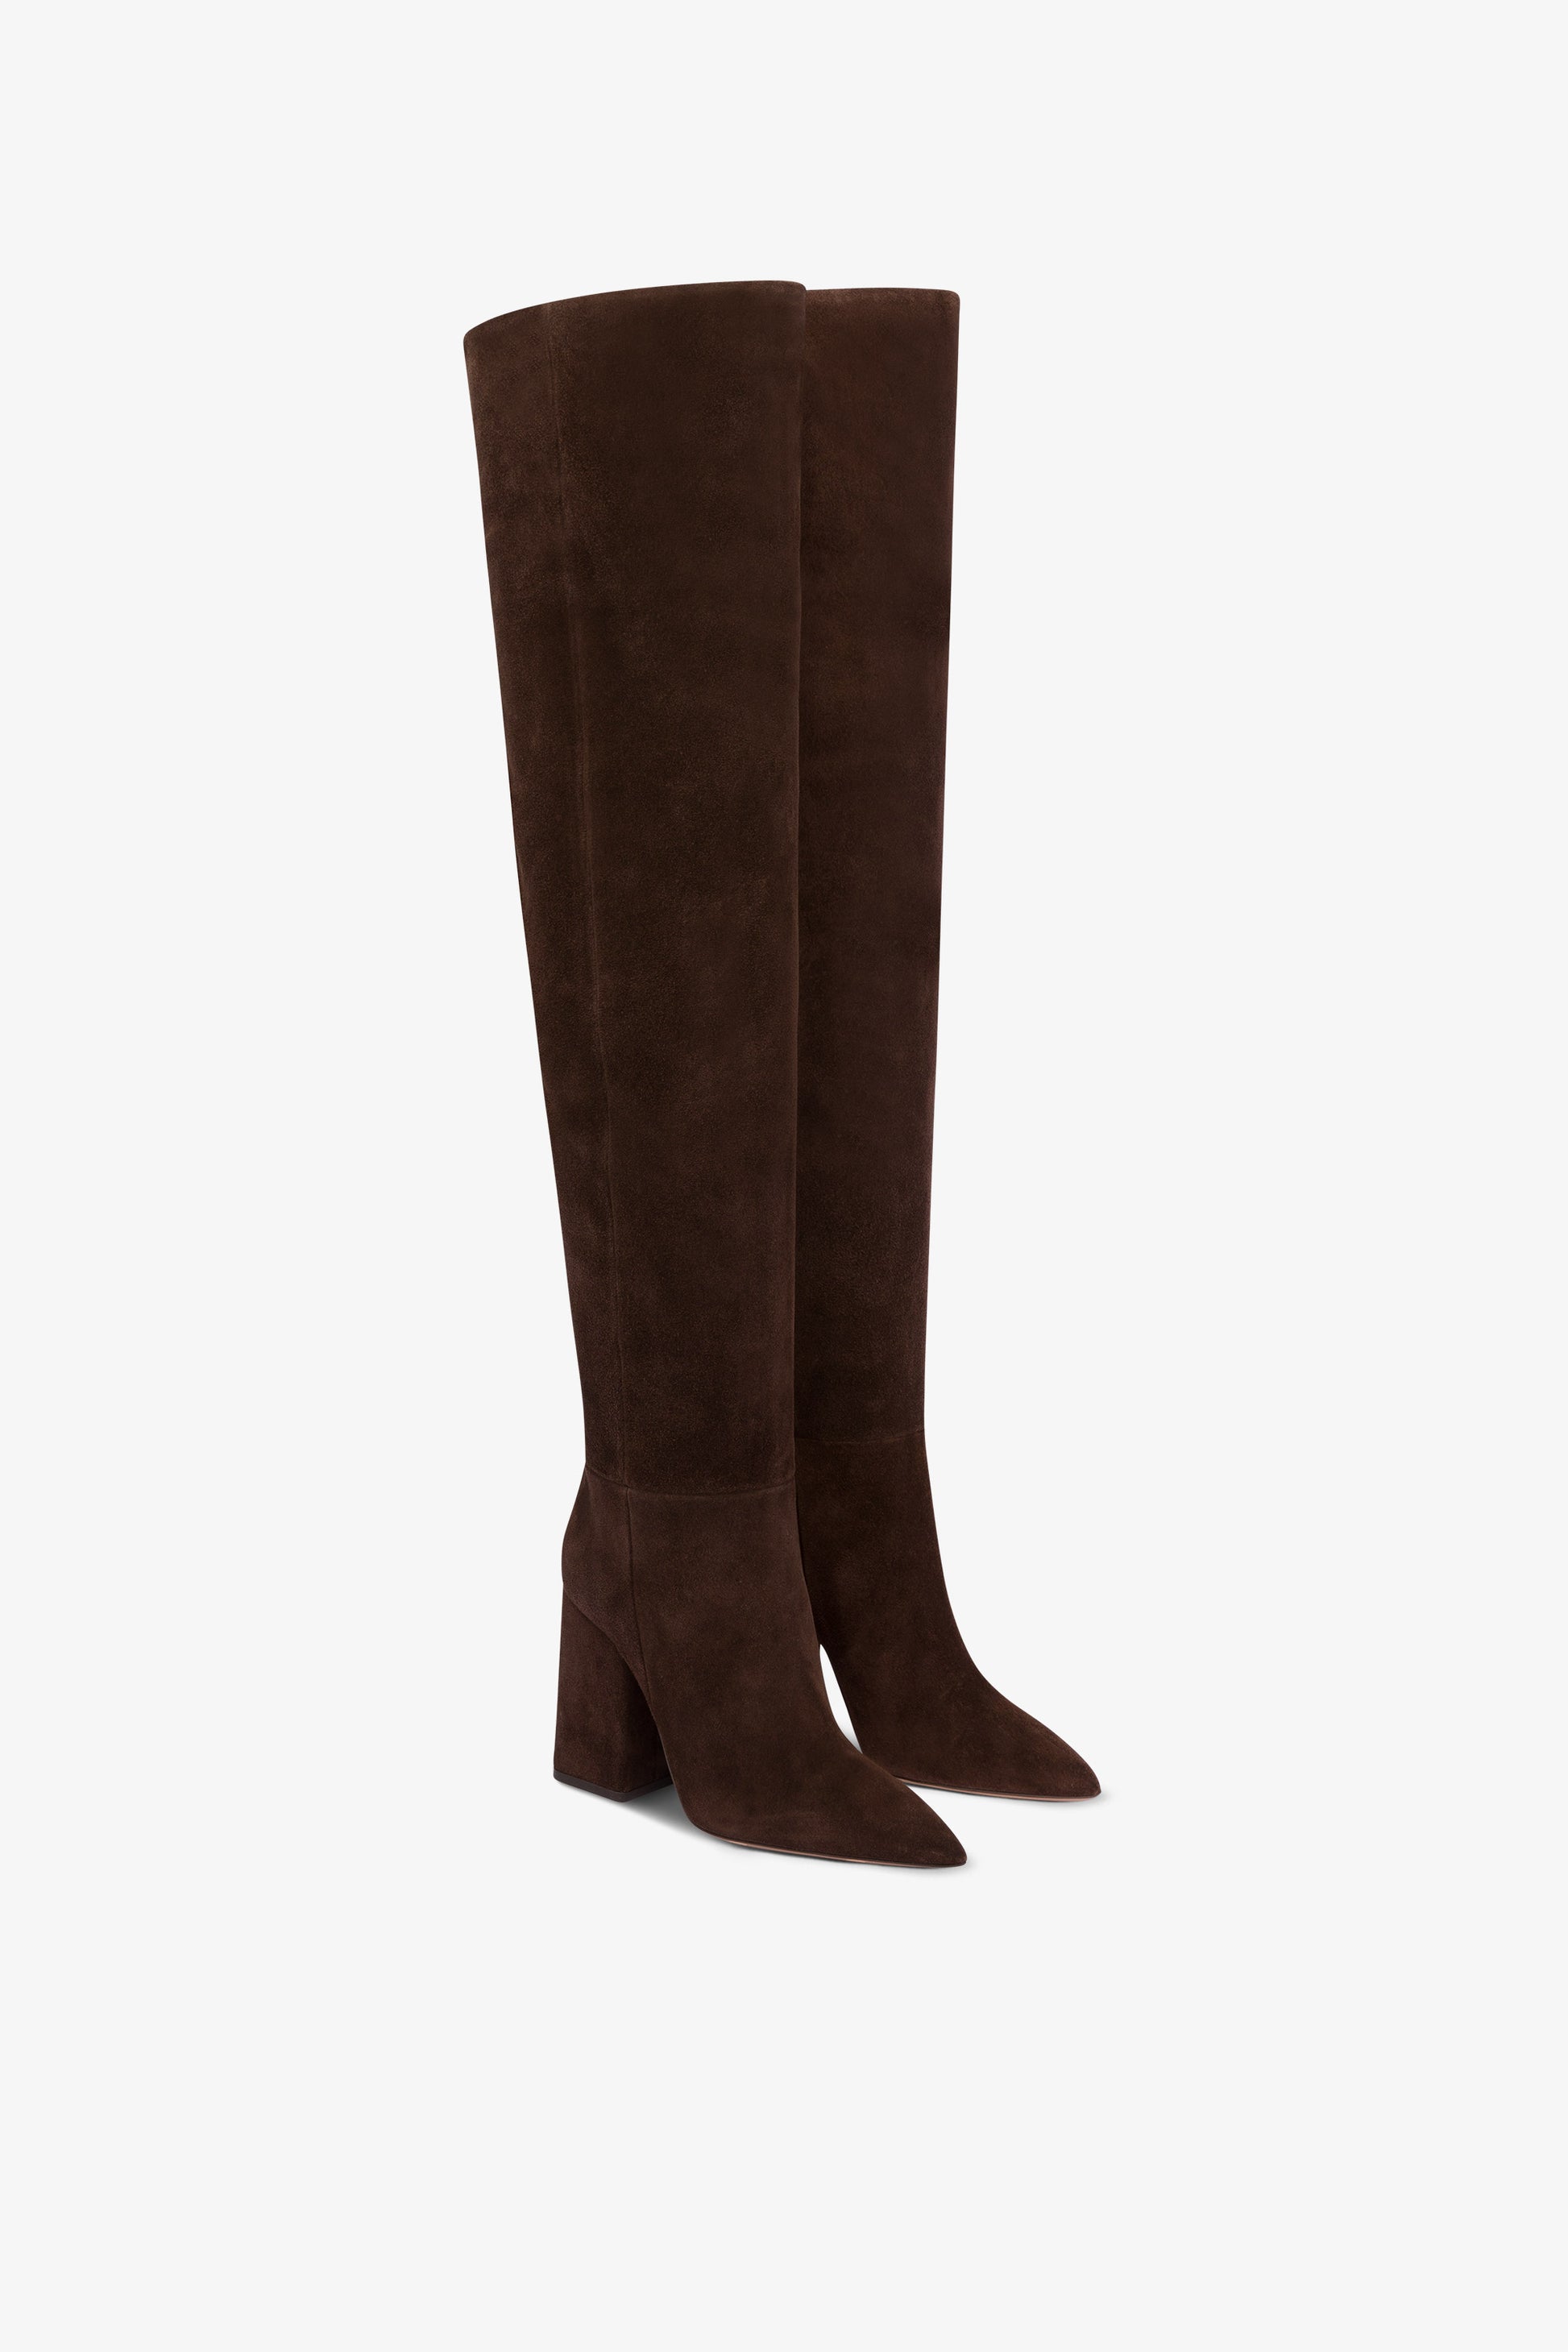 Over-the-knee, long pointed boots in soft pepper suede leather